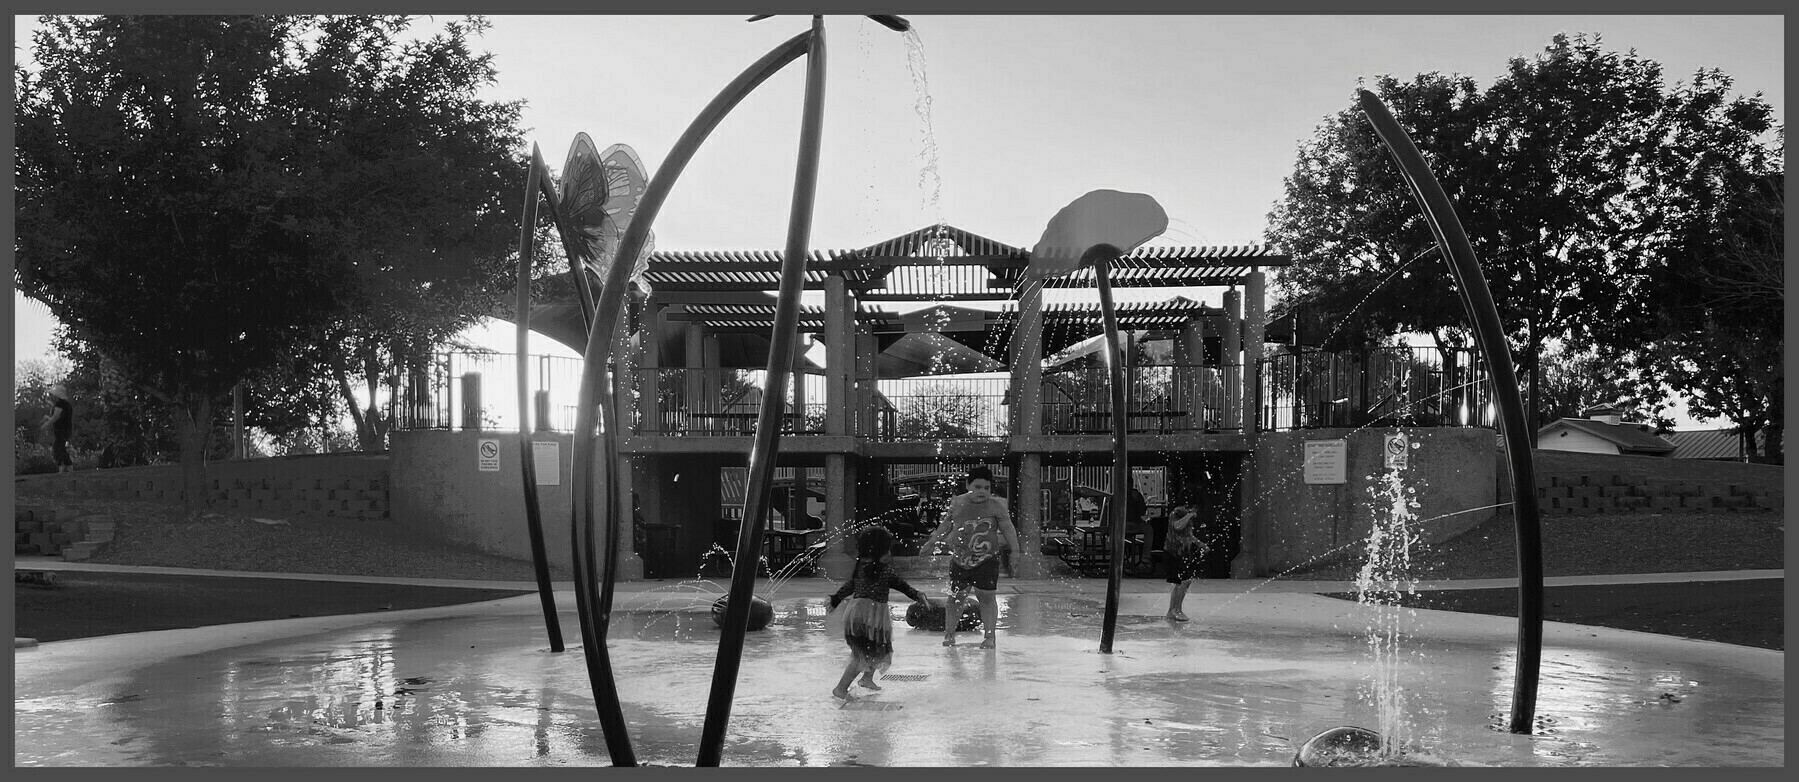 Wide angle crop of children playing in a splash pad